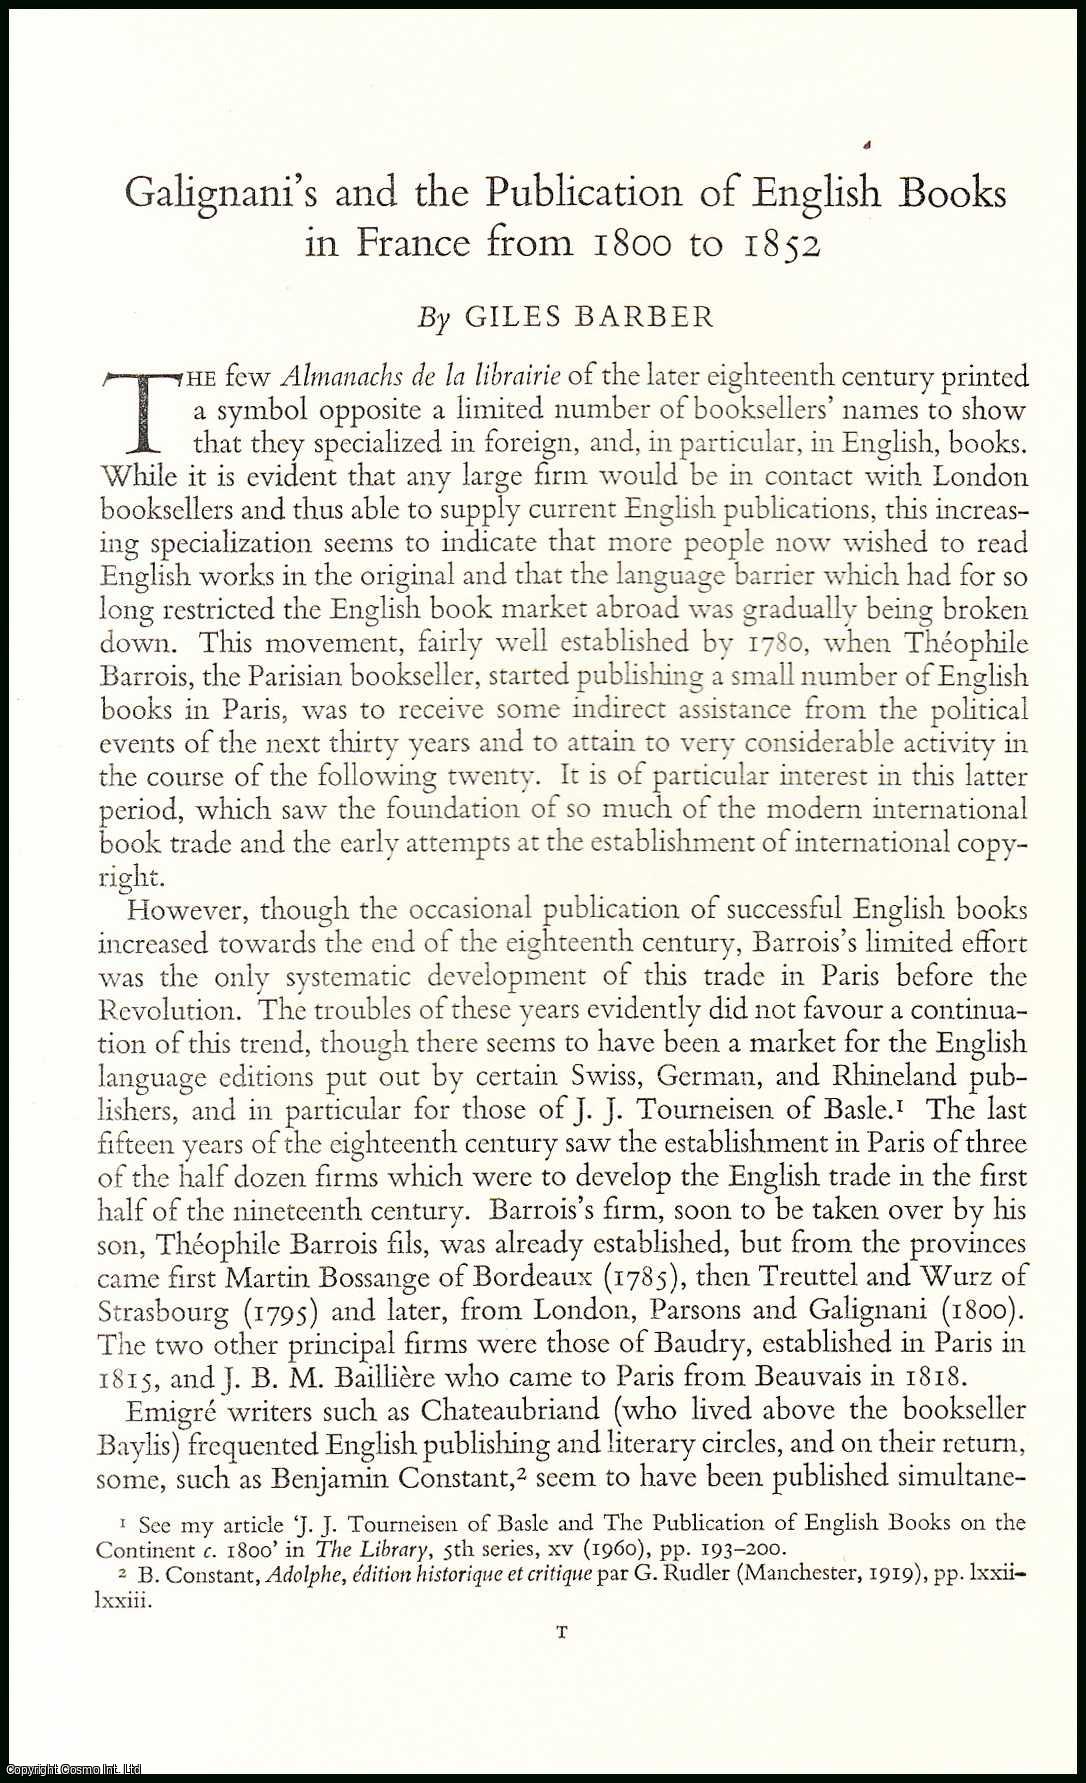 Giles Barber - Galignani's & the Publication of English Books in France from 1800 to 1852. An uncommon original article from the Library, 1961.